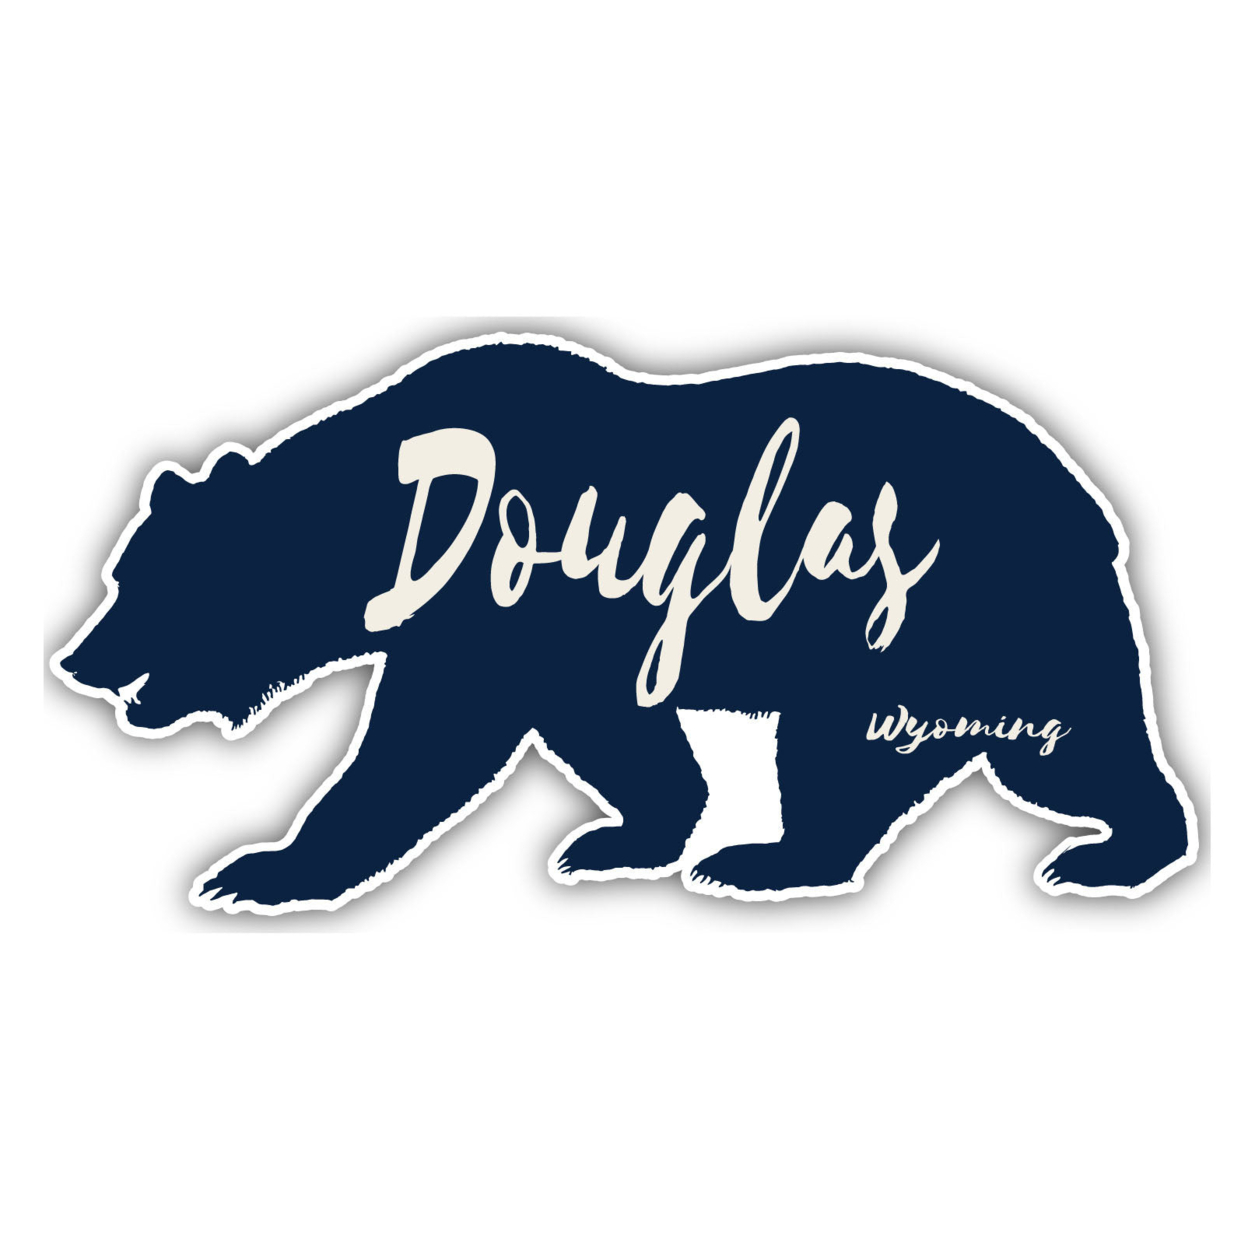 Douglas Wyoming Souvenir Decorative Stickers (Choose Theme And Size) - 4-Pack, 12-Inch, Bear